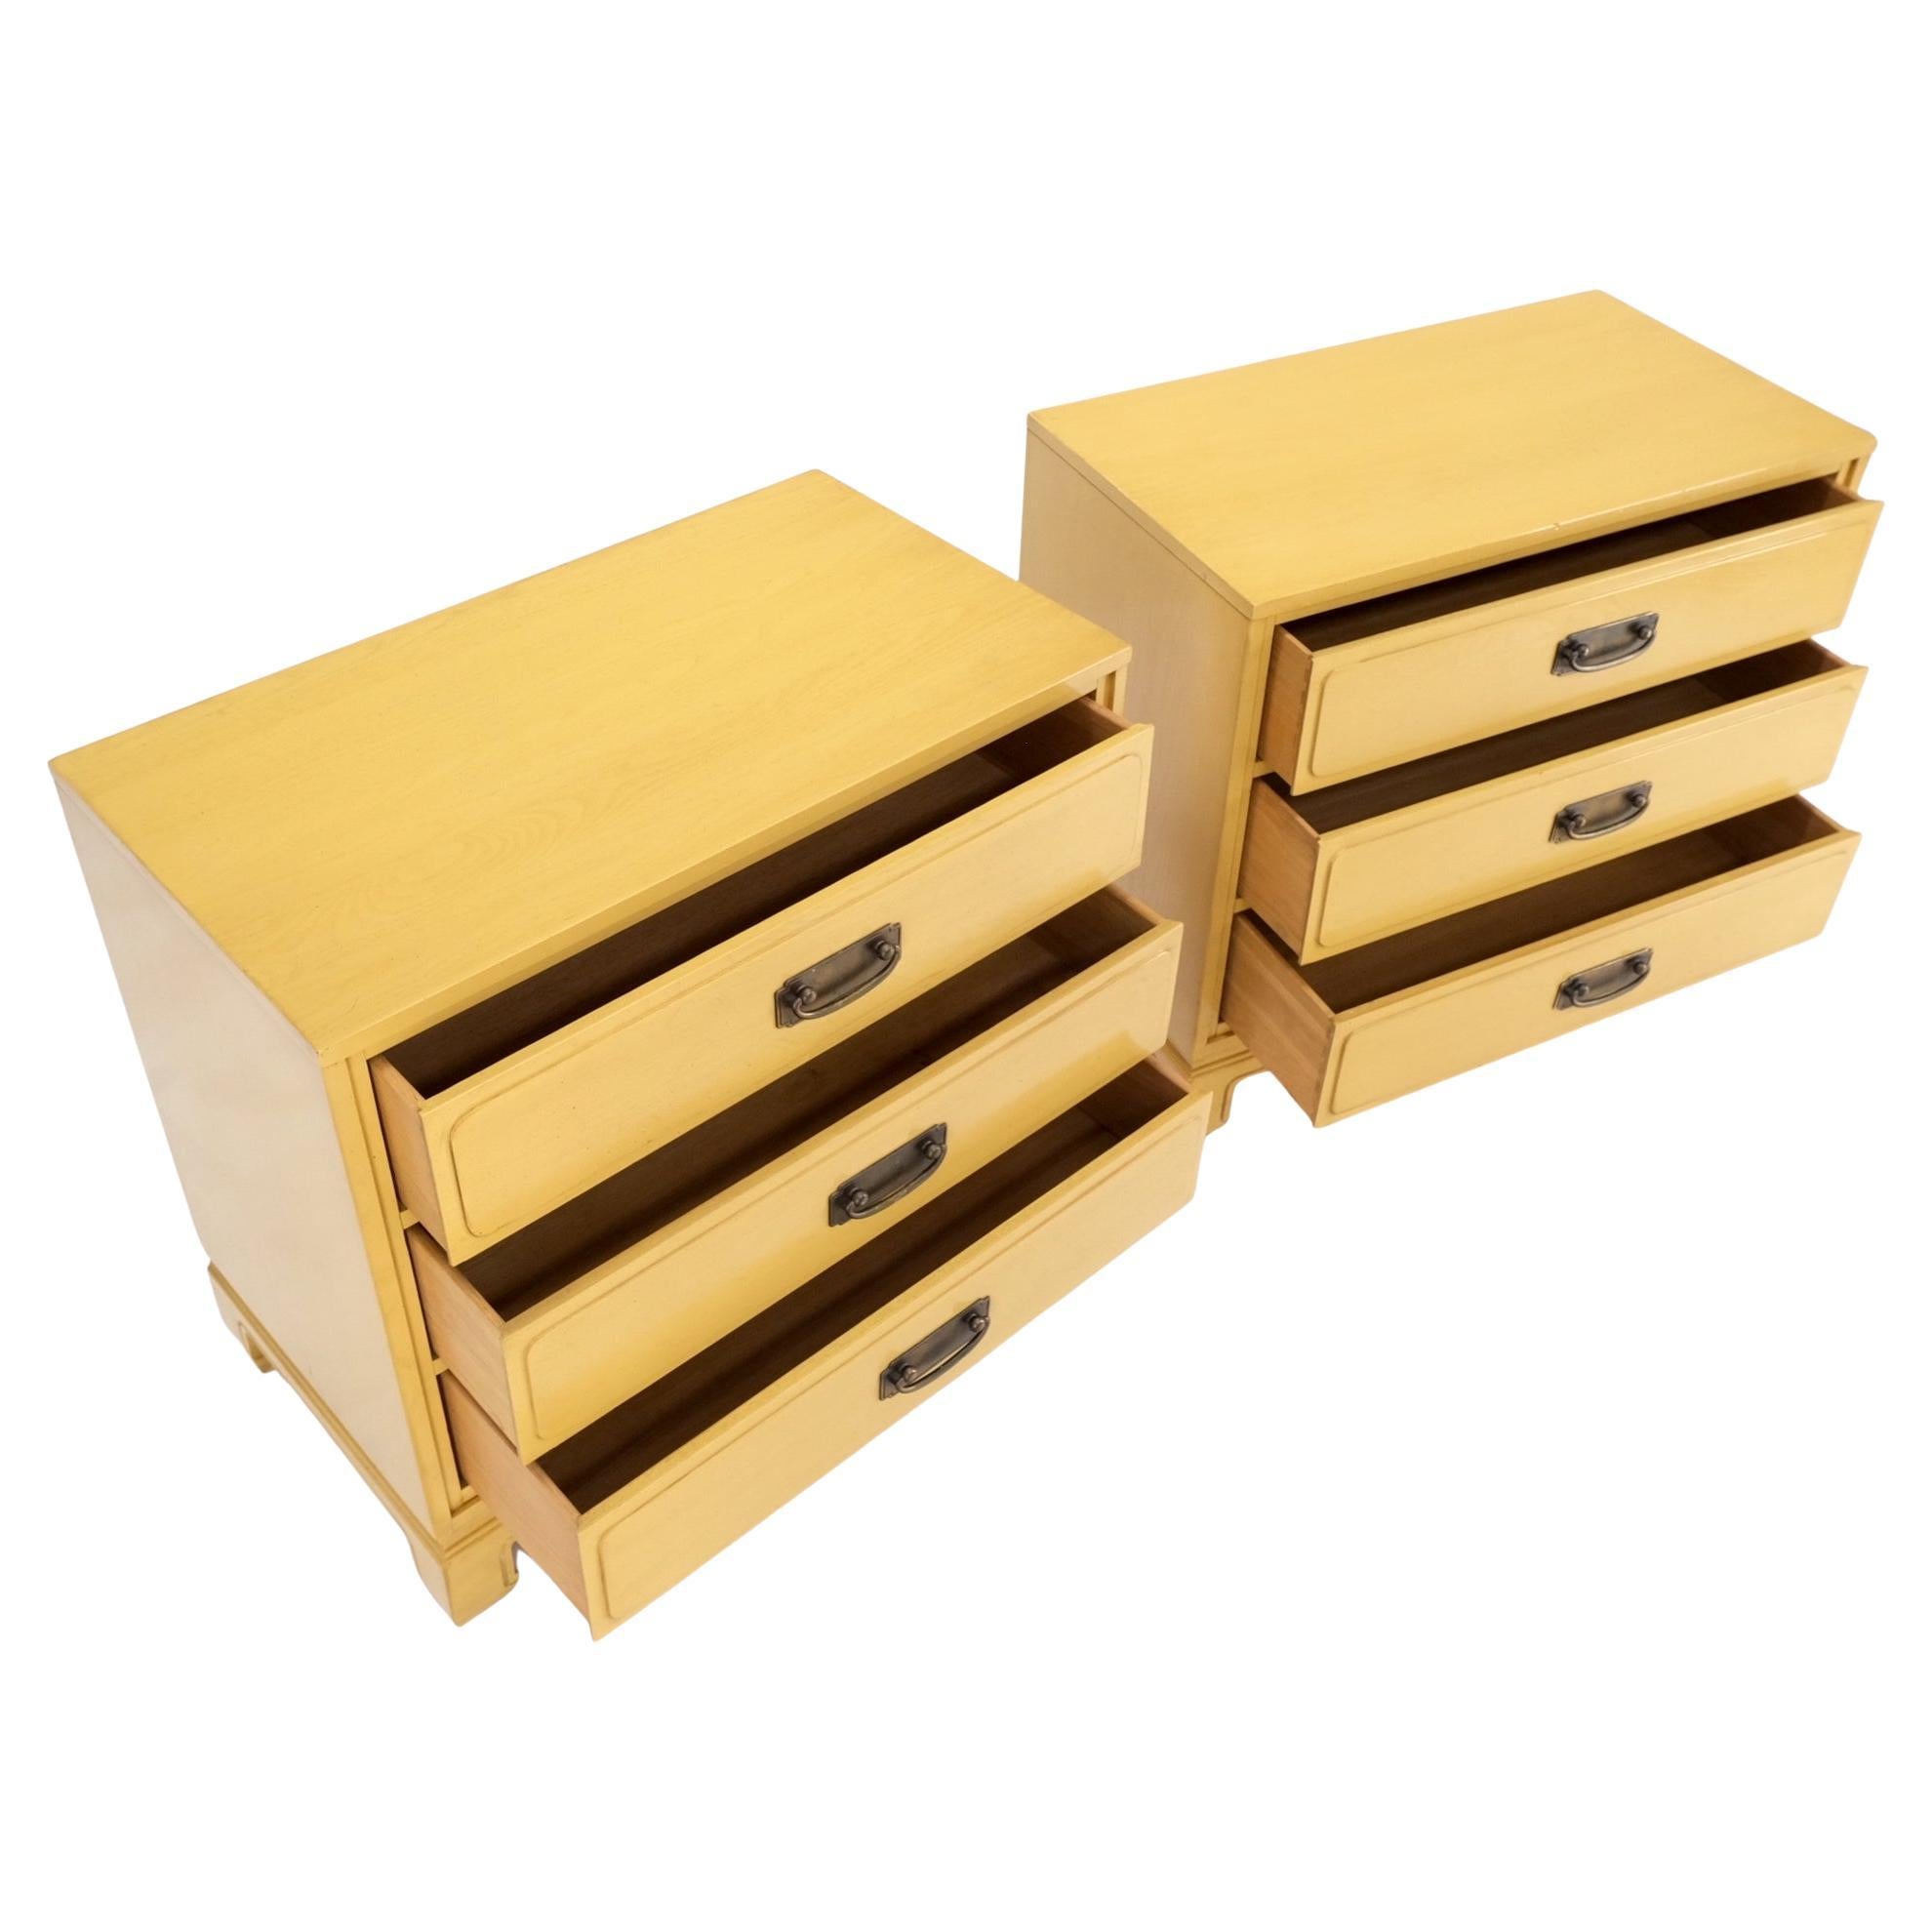 Pair Davis Mid-Century Modern lemon yellow drop pulls 3 drawers bachelor chests large nigthstands cabinets consoles.